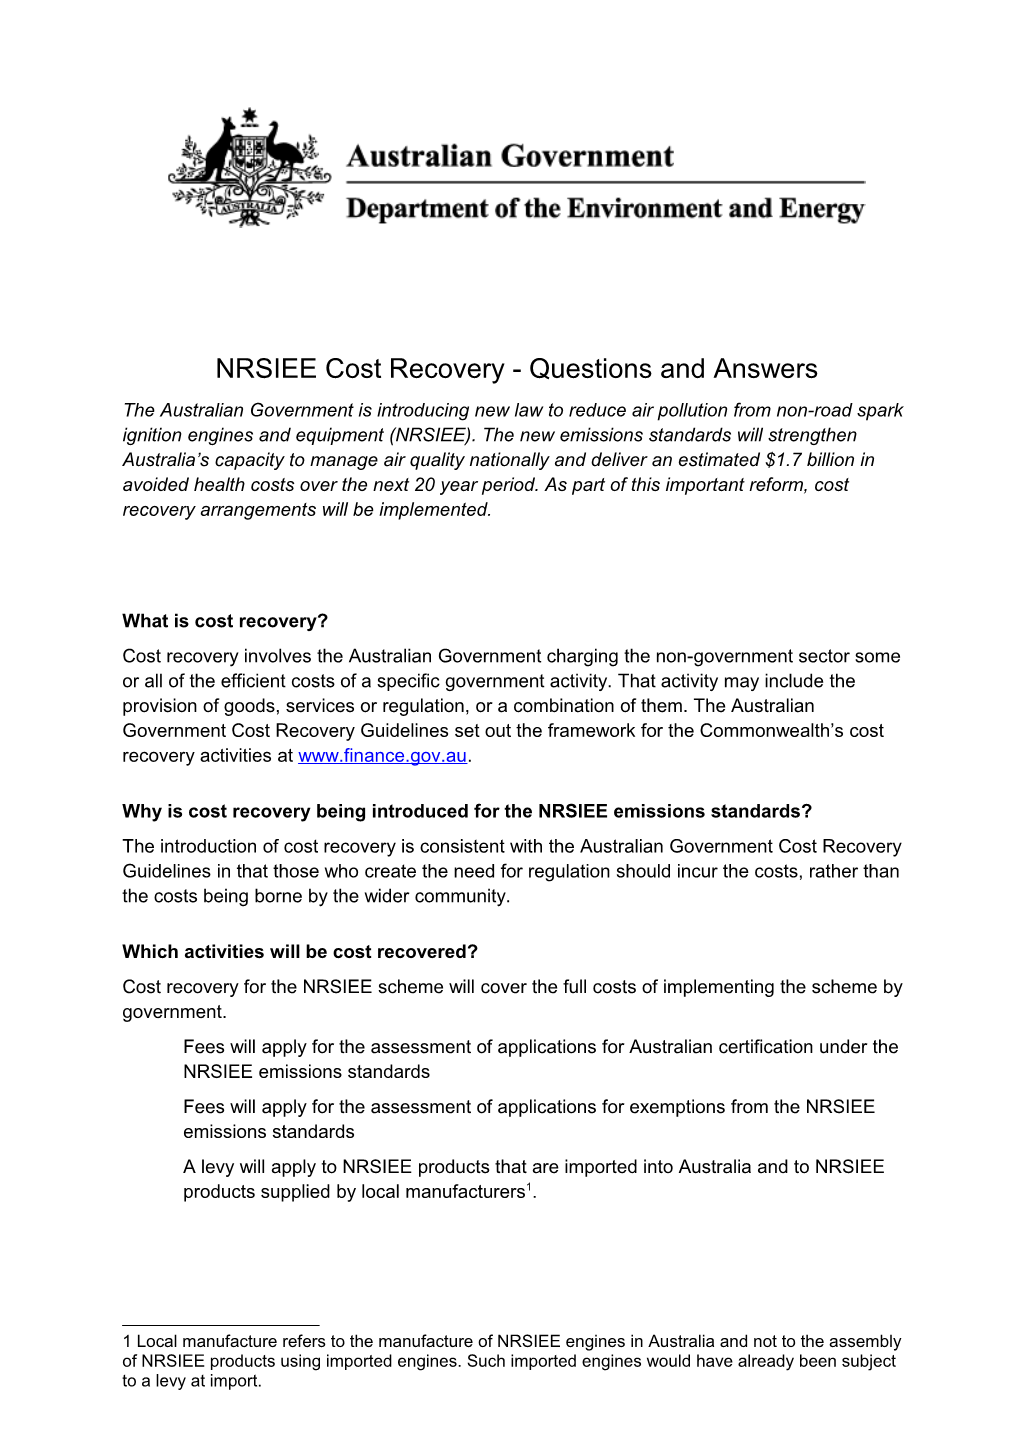 NRSIEE Cost Recovery - Questions and Answers